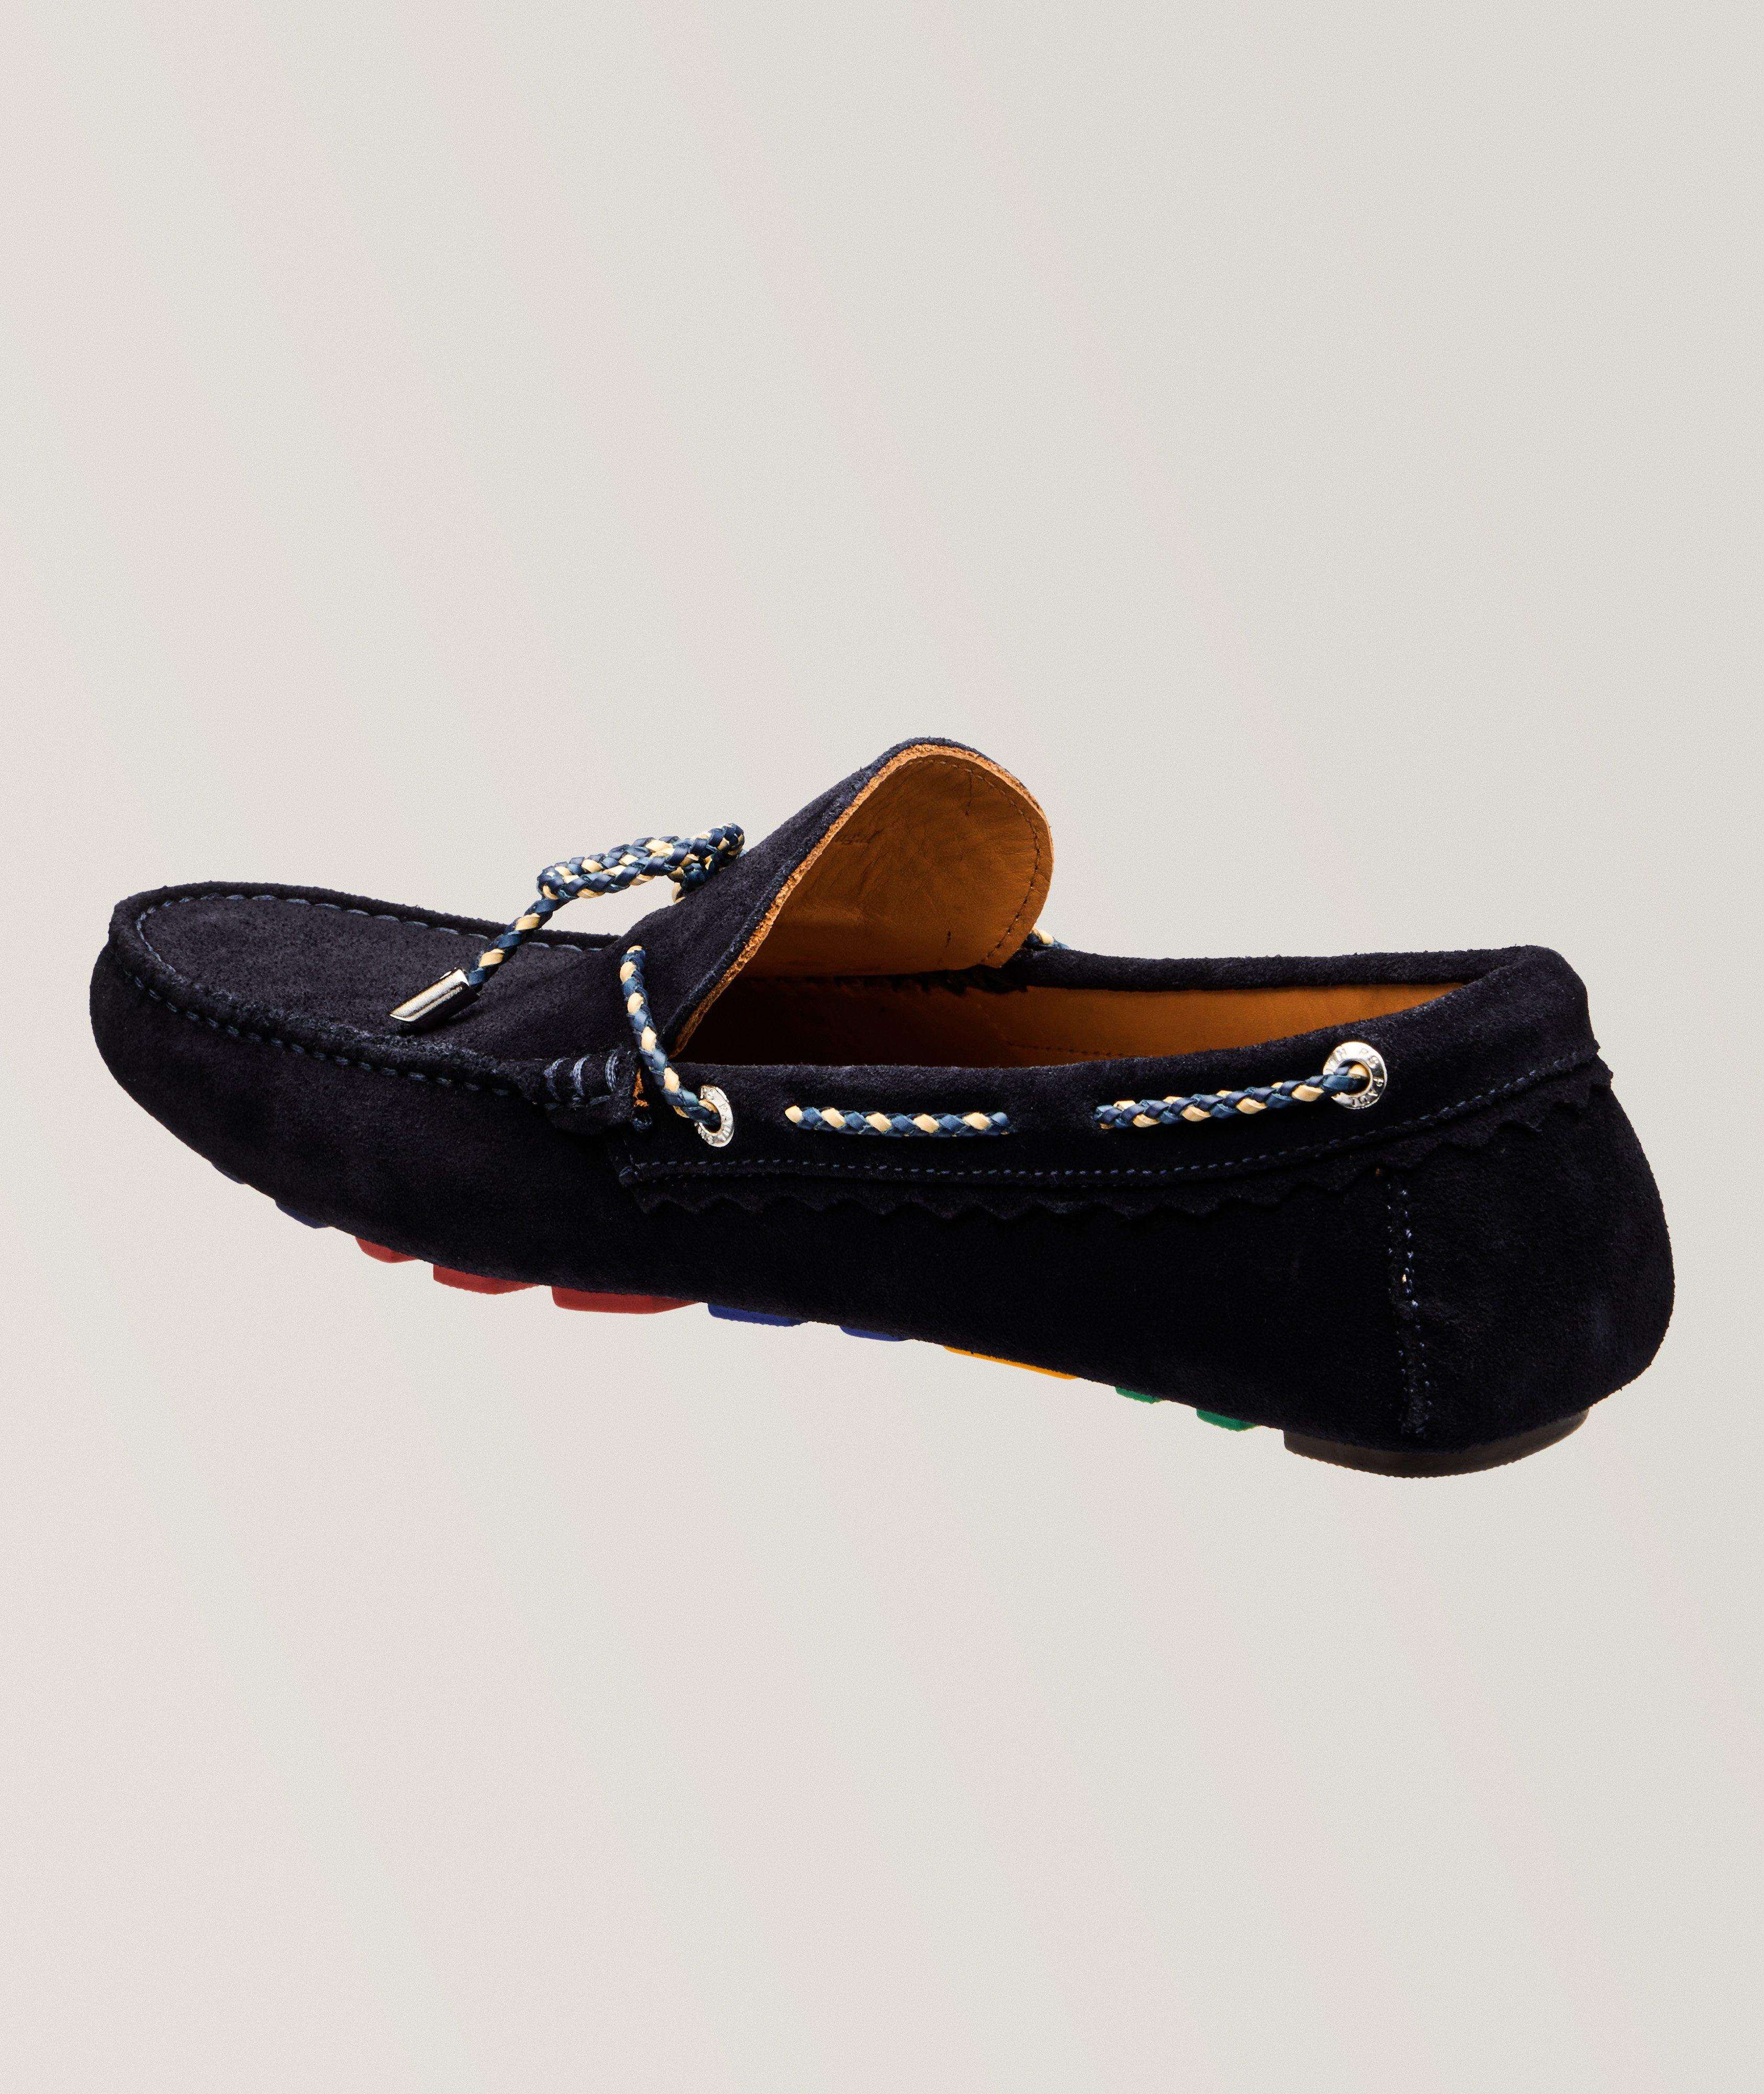 Springfield Suede Leather Driving Loafers image 1